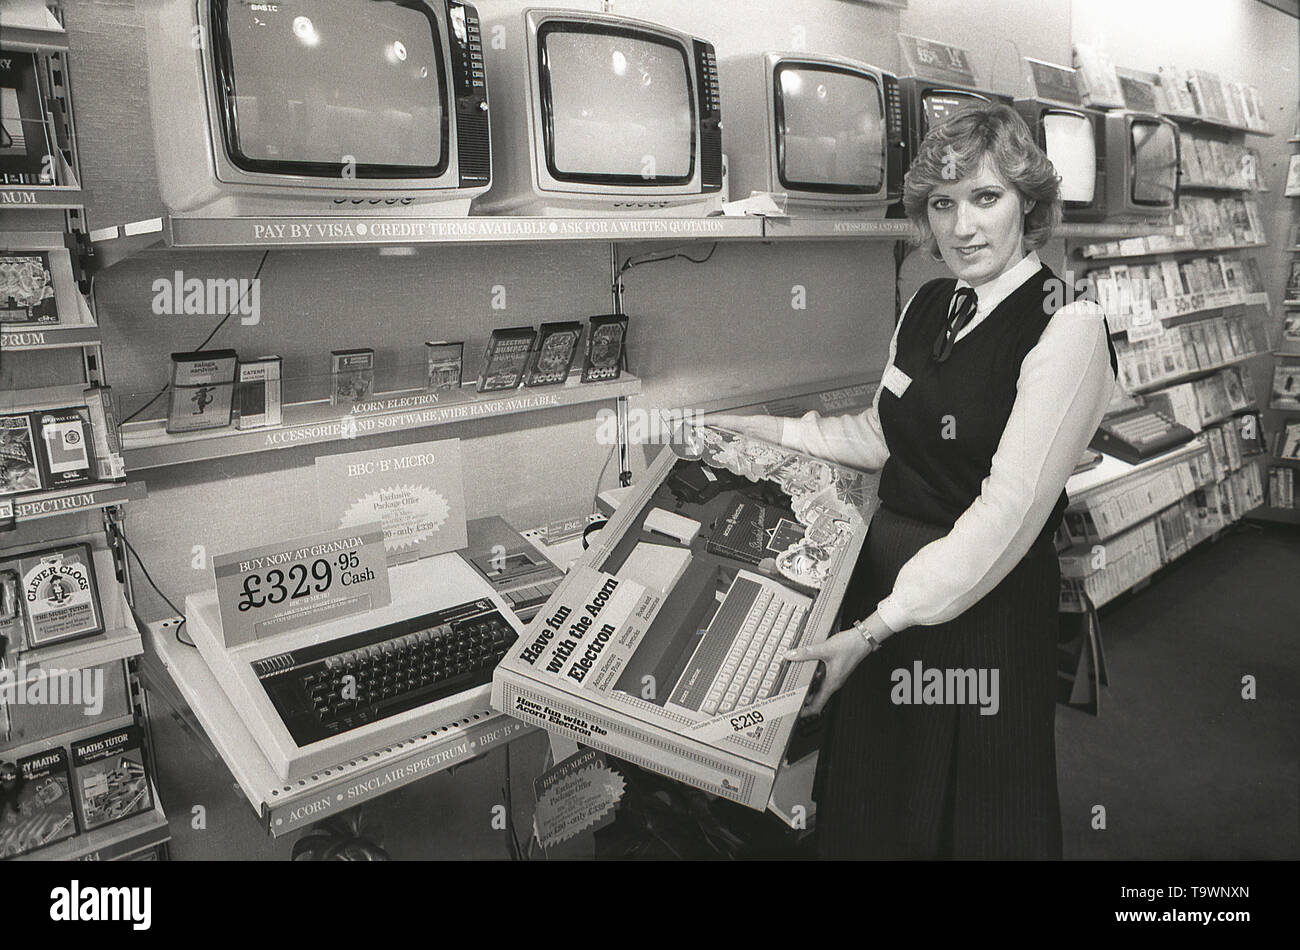 1985, historical, home electronic equipment inside a Granada TV retail shop, a female shop assistant shows the new Acorn Electron home computer, England, UK. Stock Photo